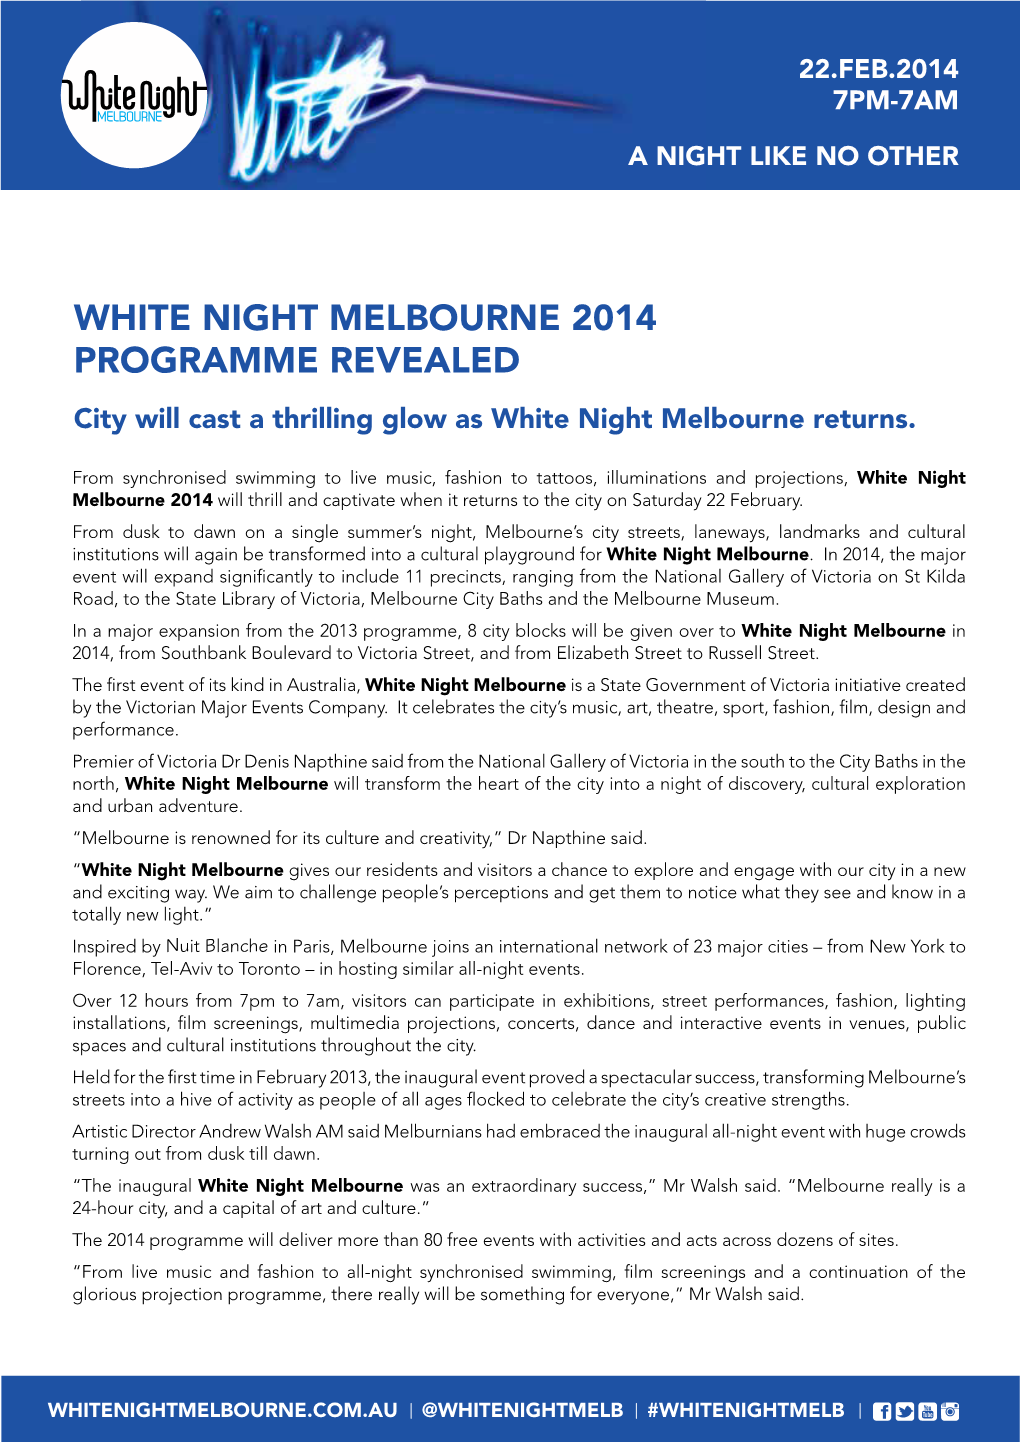 WHITE NIGHT MELBOURNE 2014 PROGRAMME REVEALED City Will Cast a Thrilling Glow As White Night Melbourne Returns